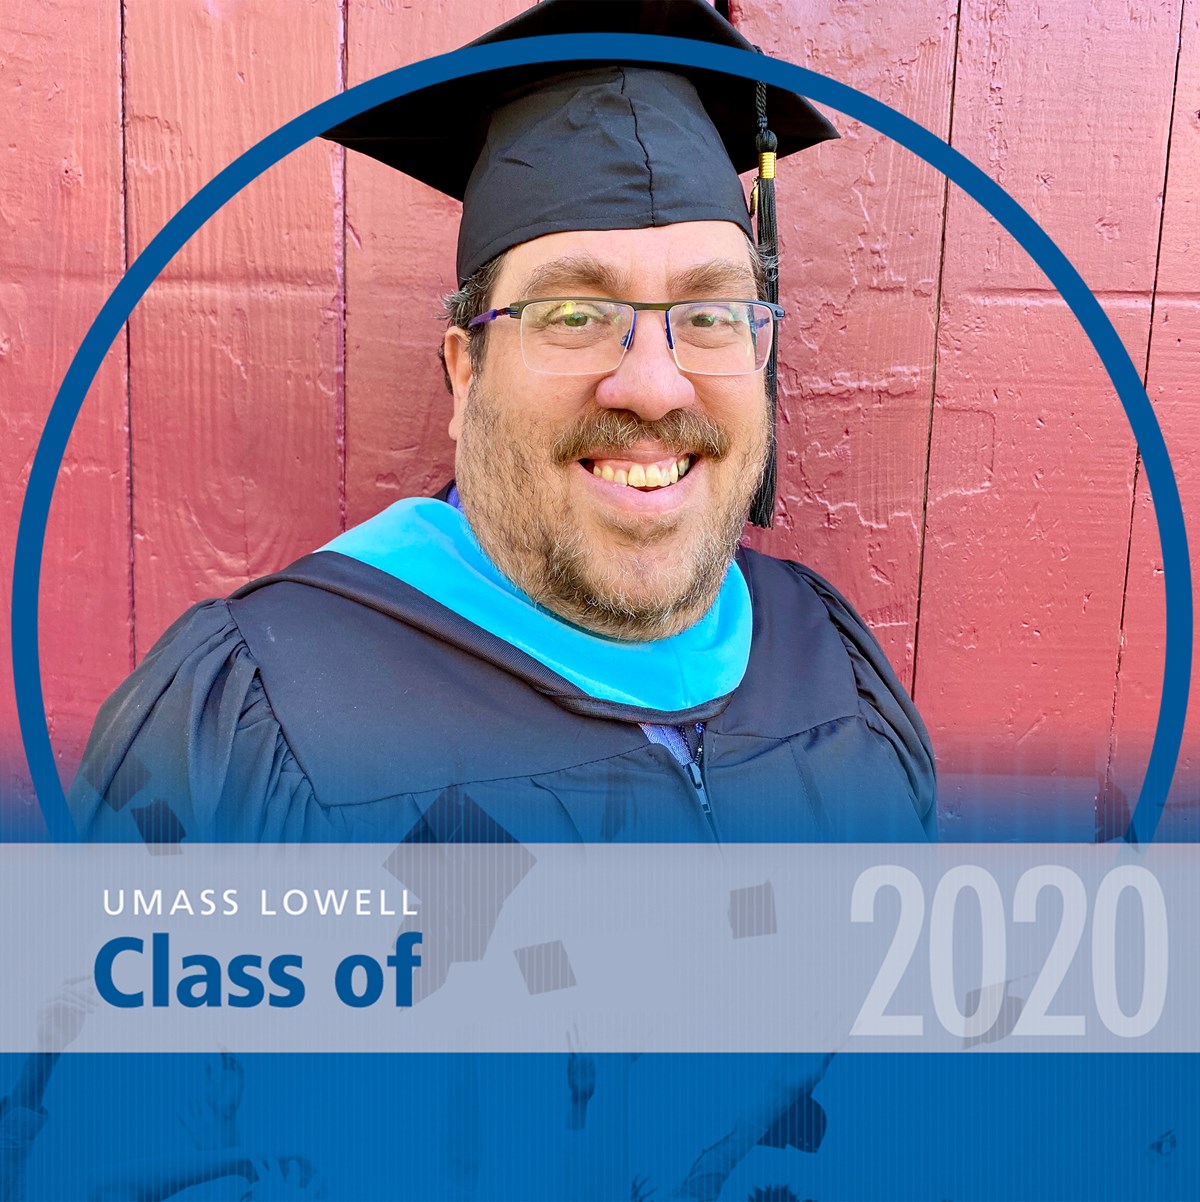 Headshot of Roberto Rivera in cap and gown with a blue decorative frame around it that reads "UMass Lowell Class of 2020."